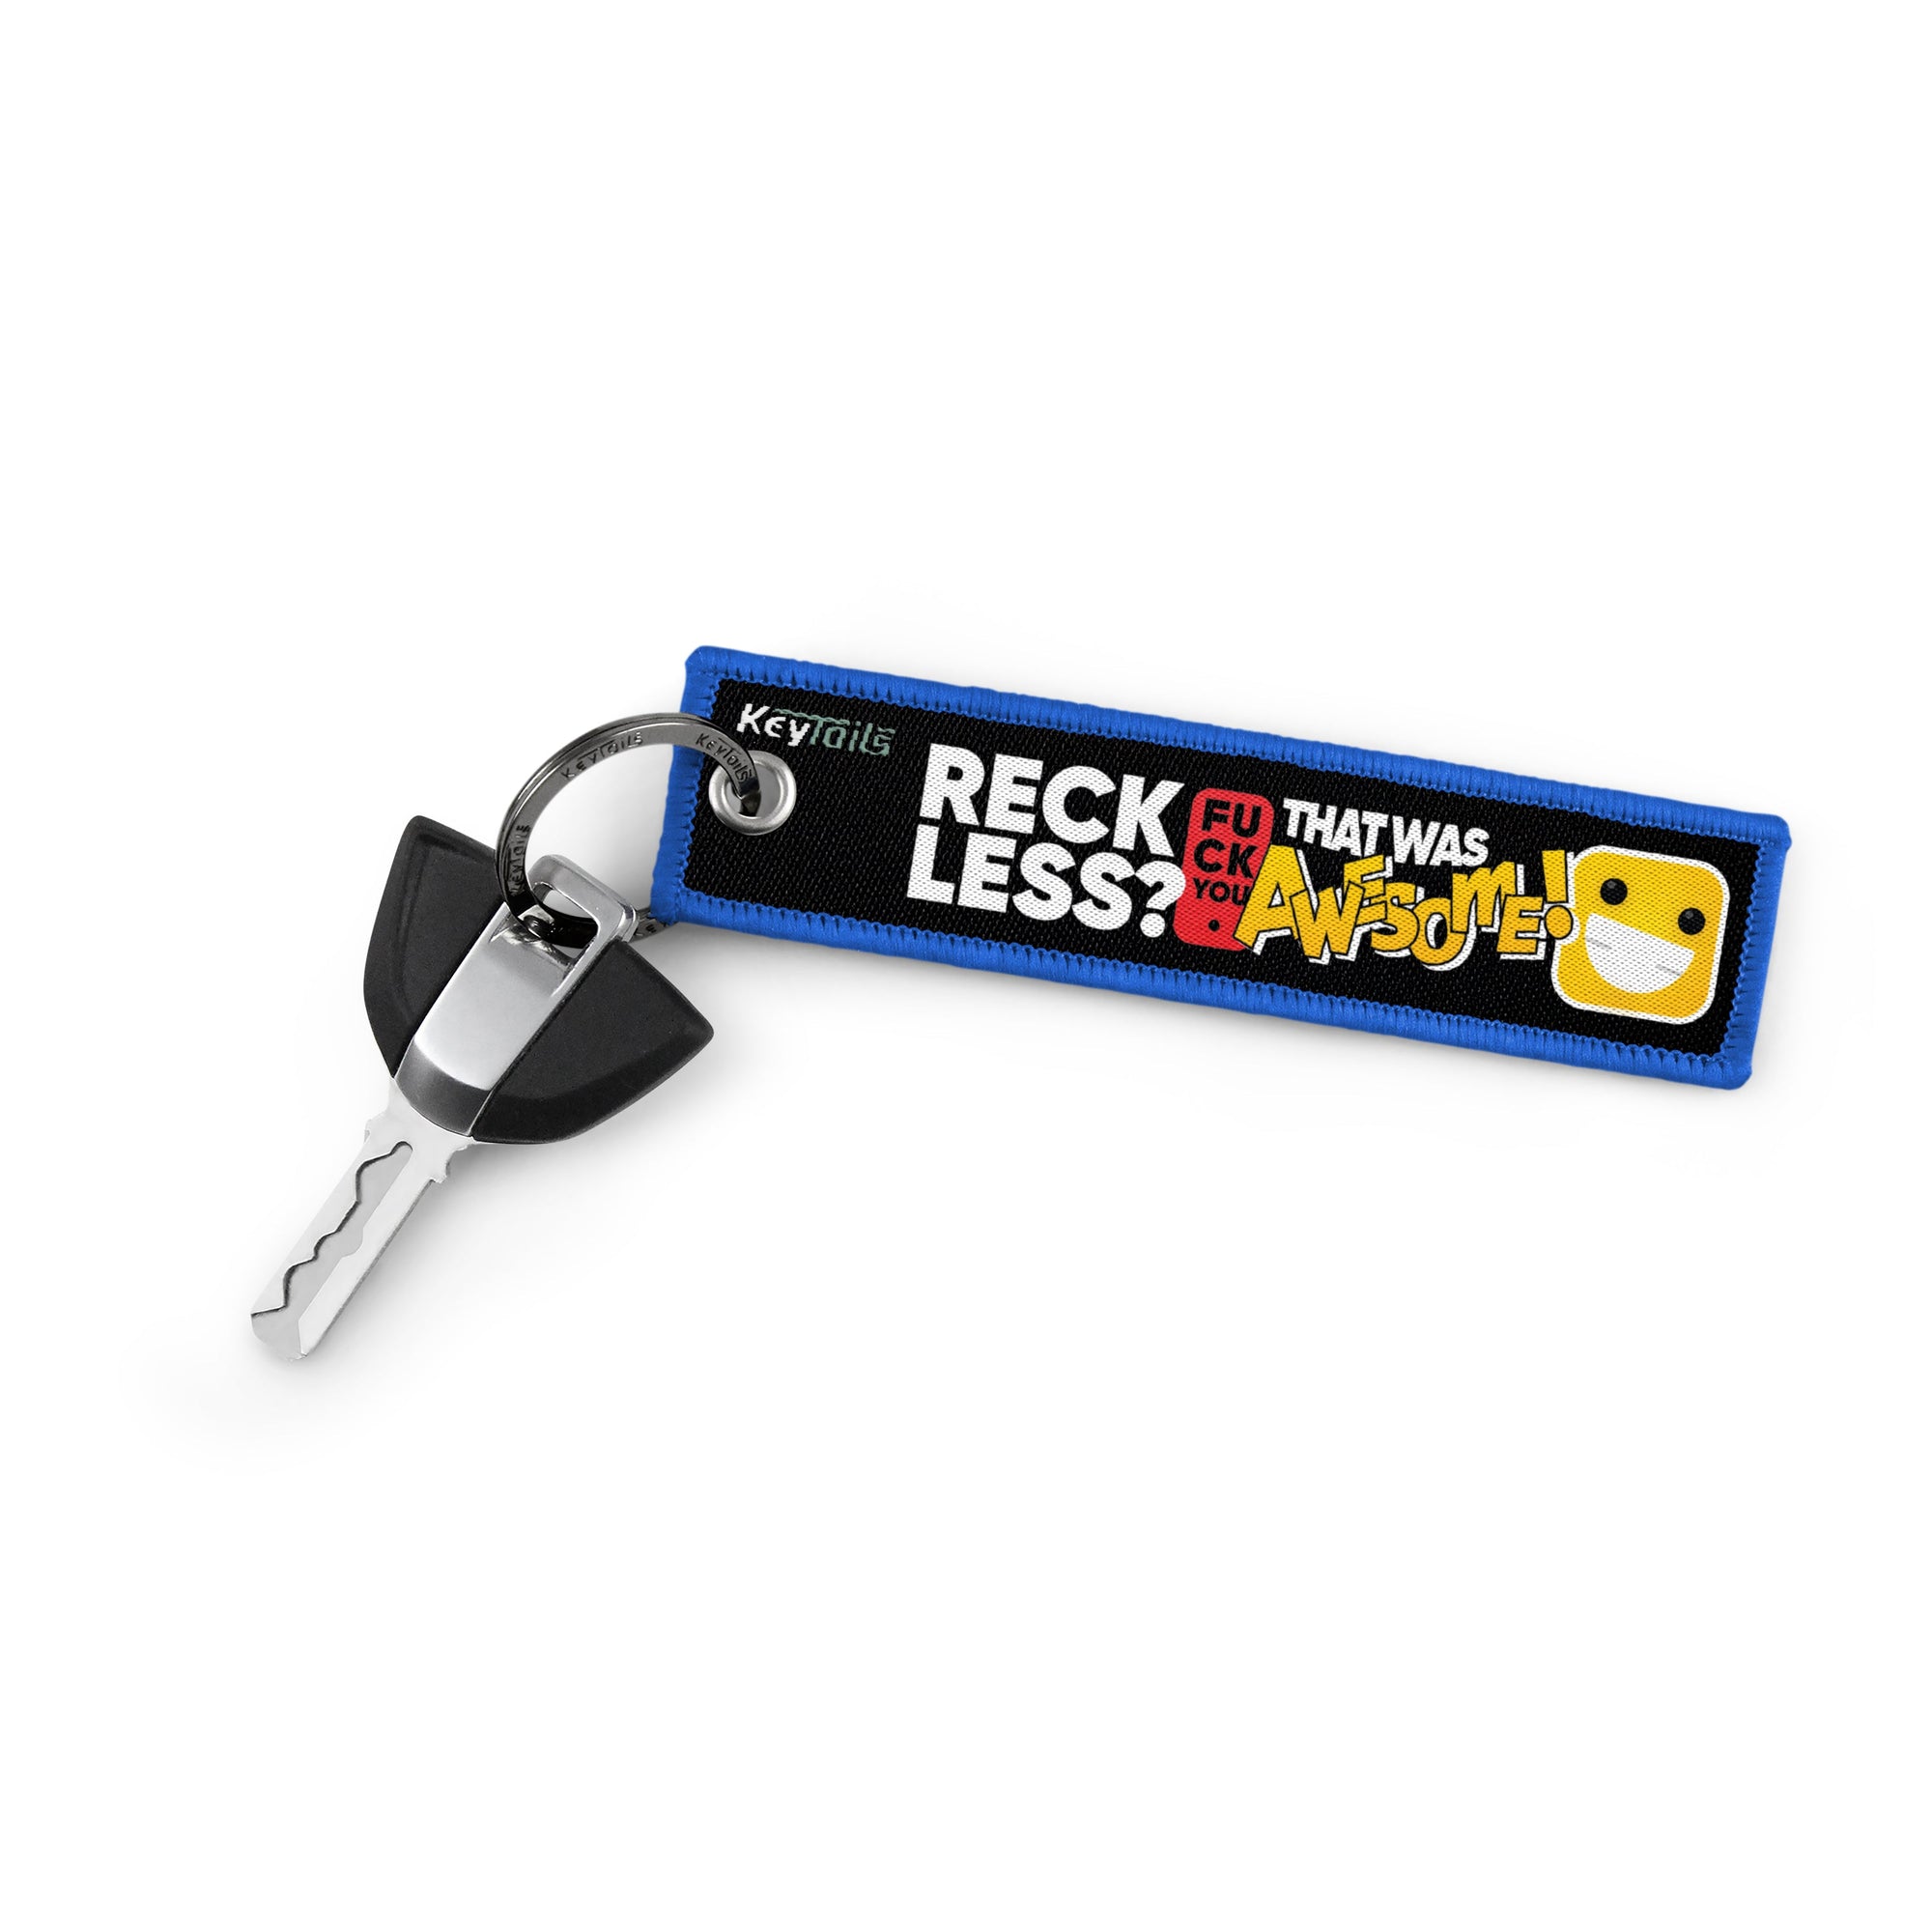 Reckless? FU That Was Awesome! Keychain, Key Tag - Red